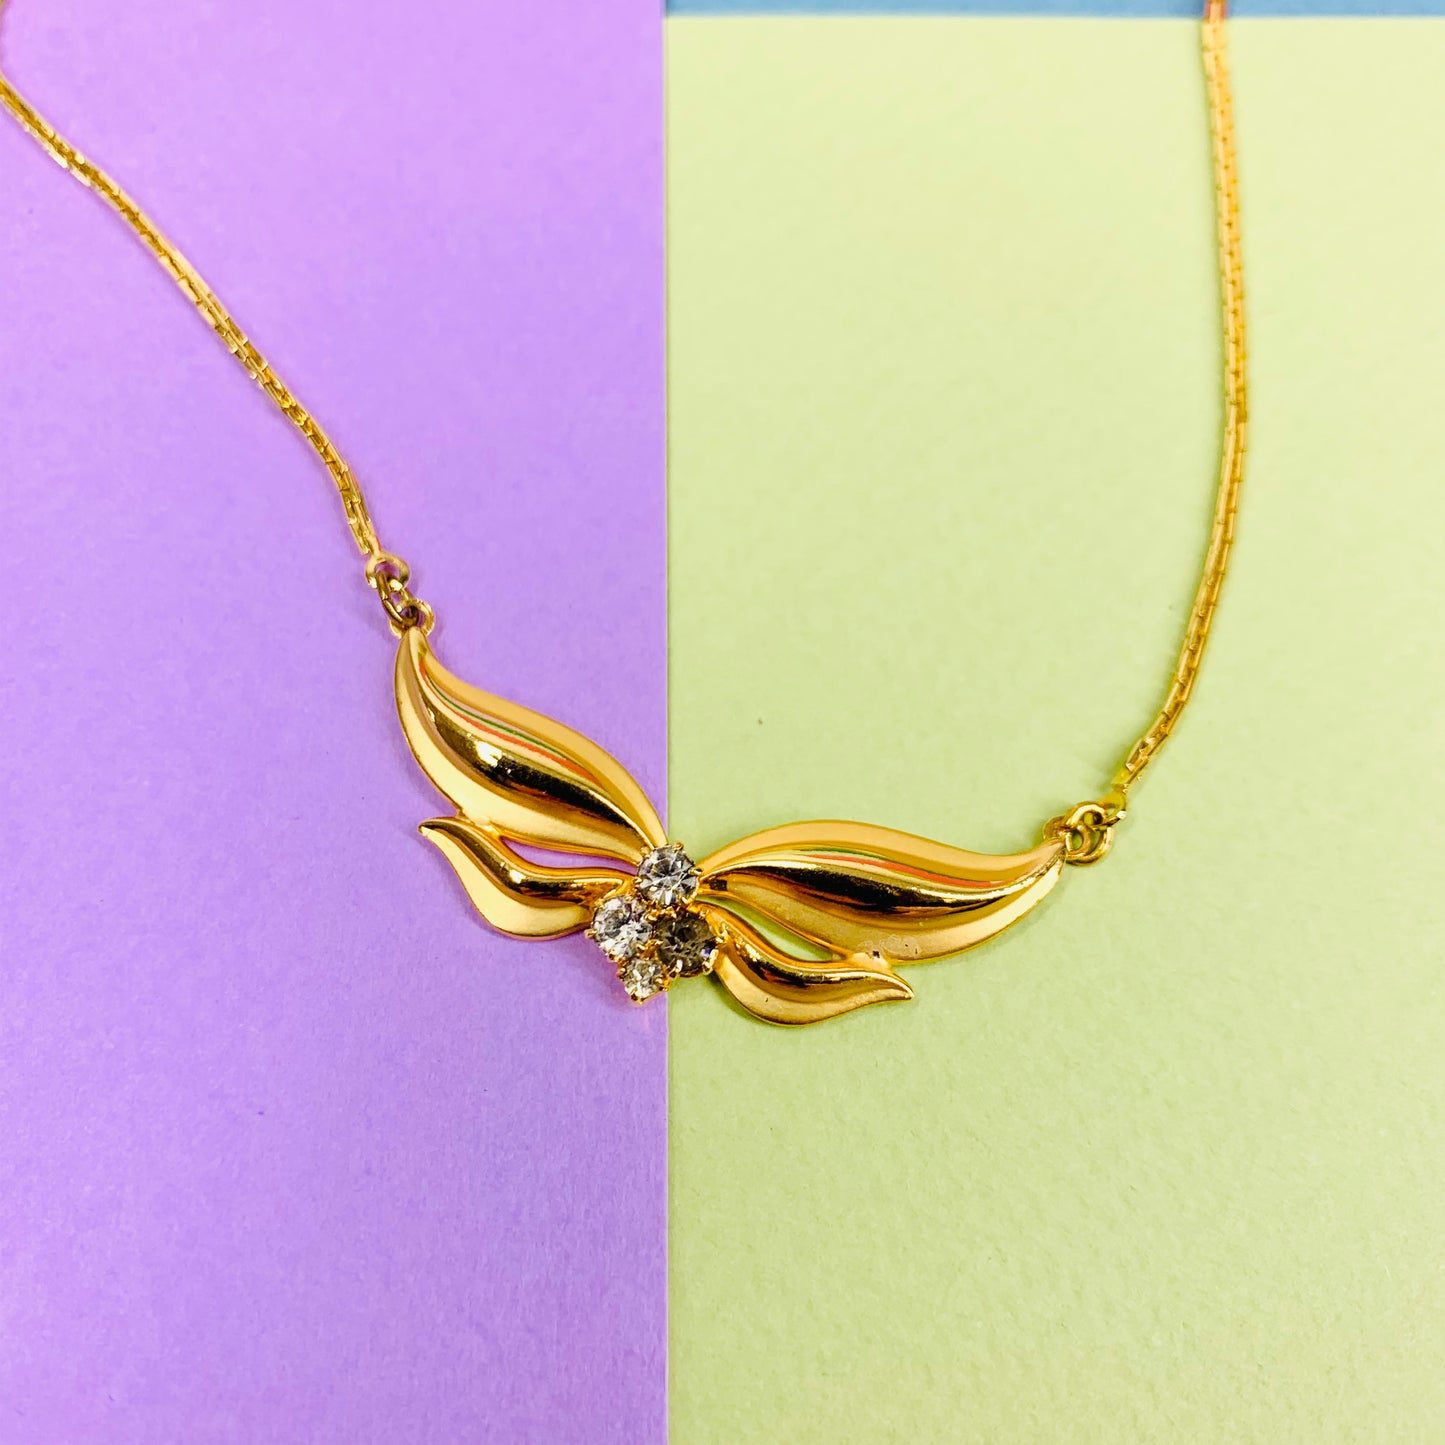 Rare 1970s Anson American triple plated gold necklace with butterfly pendant